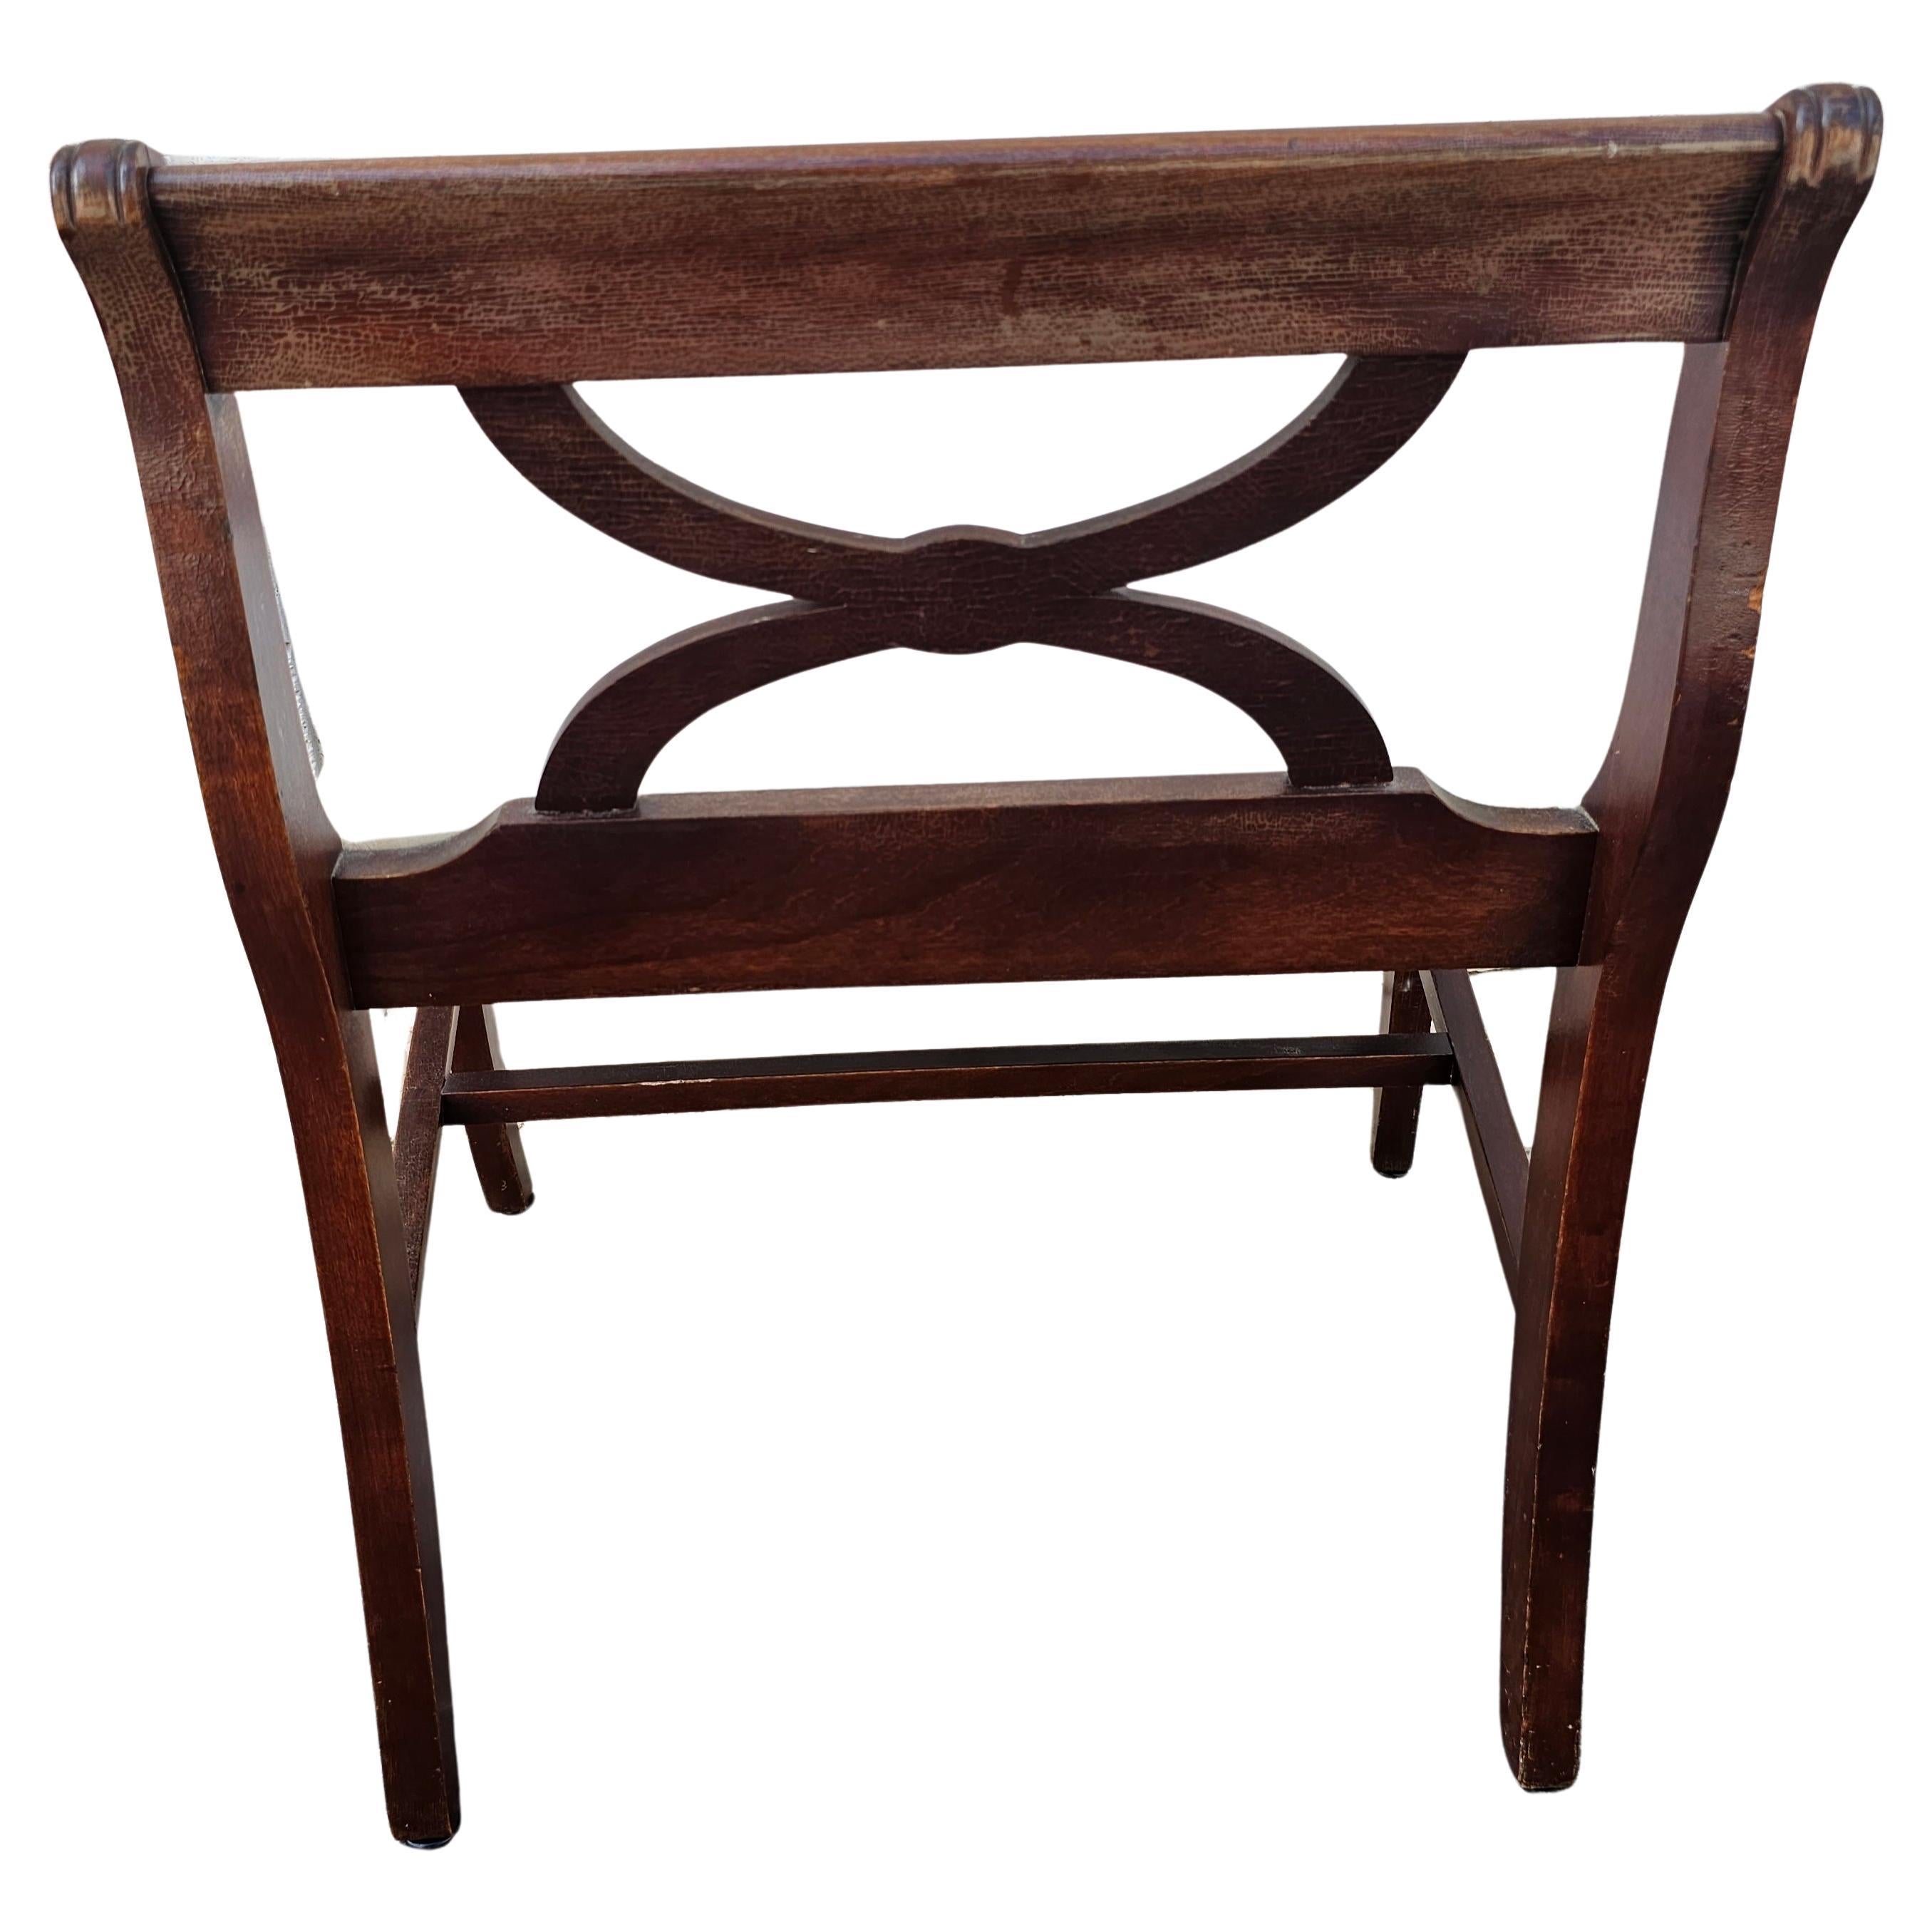 20th Century Mid-Century Georgian Style Mahogany And Upholstered Seat Vanity Bench For Sale